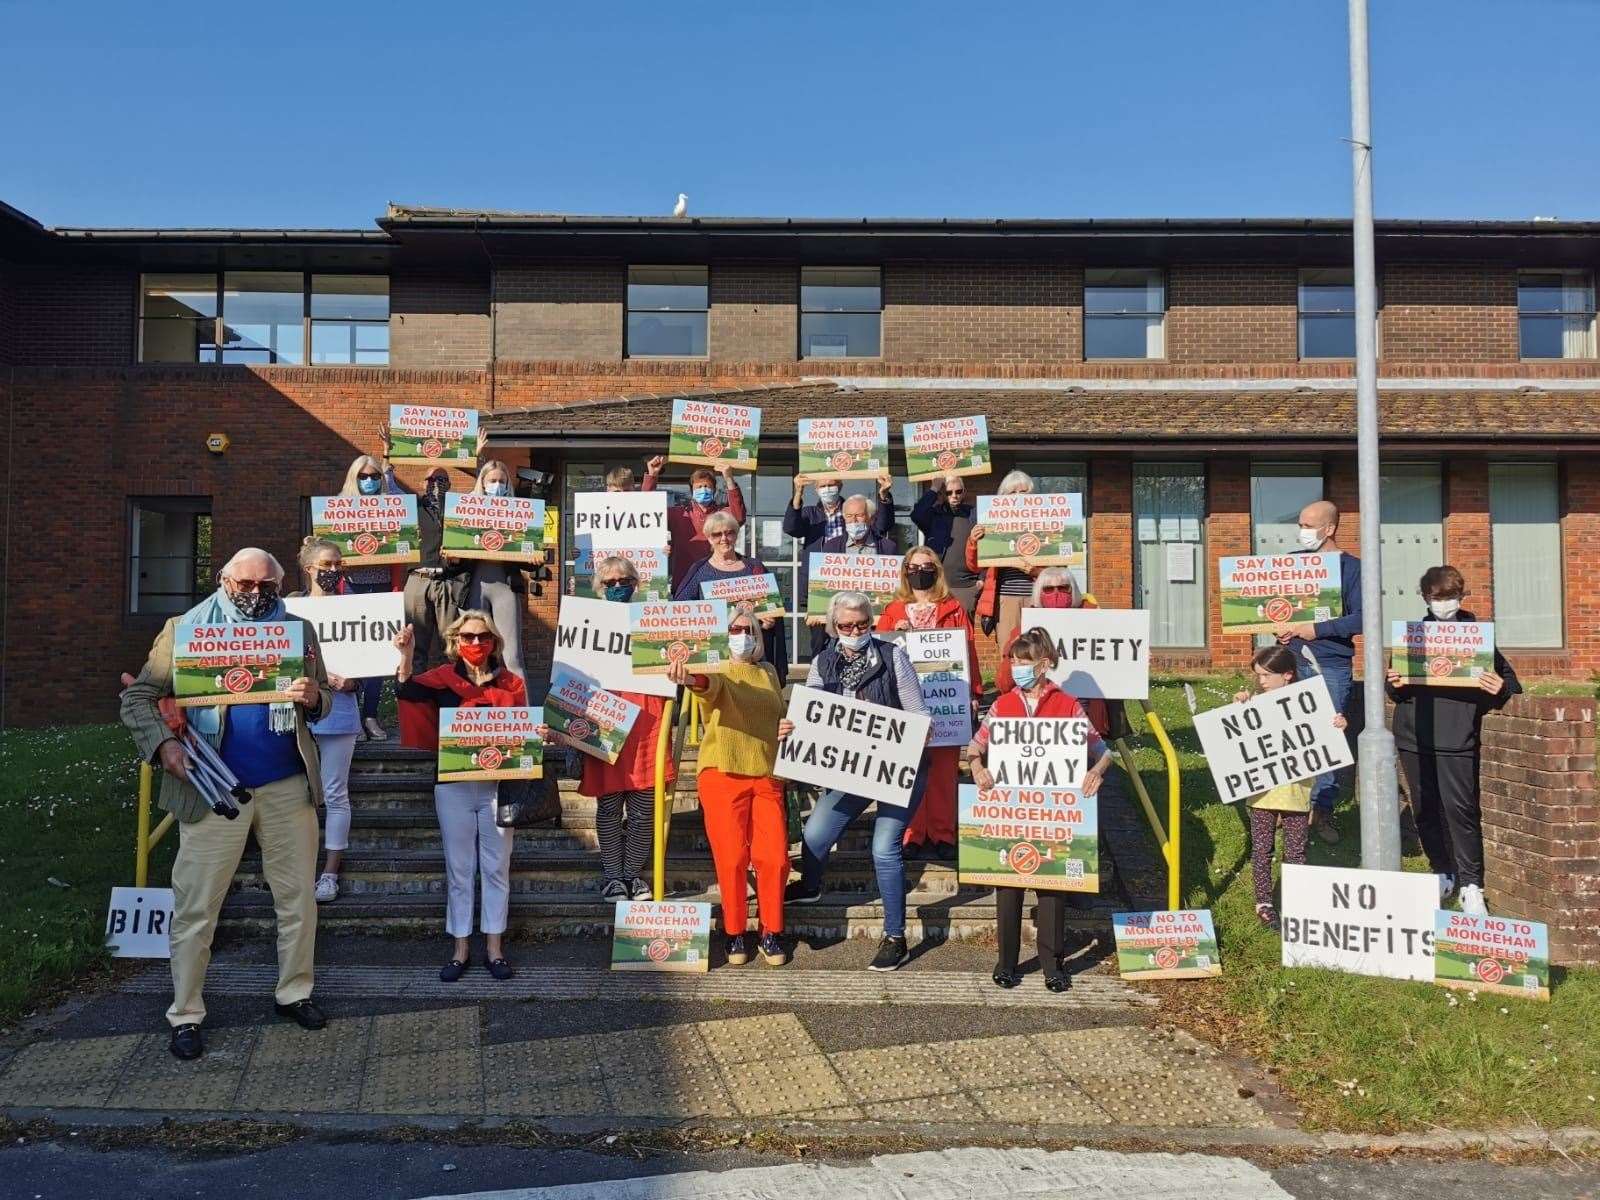 The campaigners protested at the offices of Dover District Council which will make the decision about the planned airfield